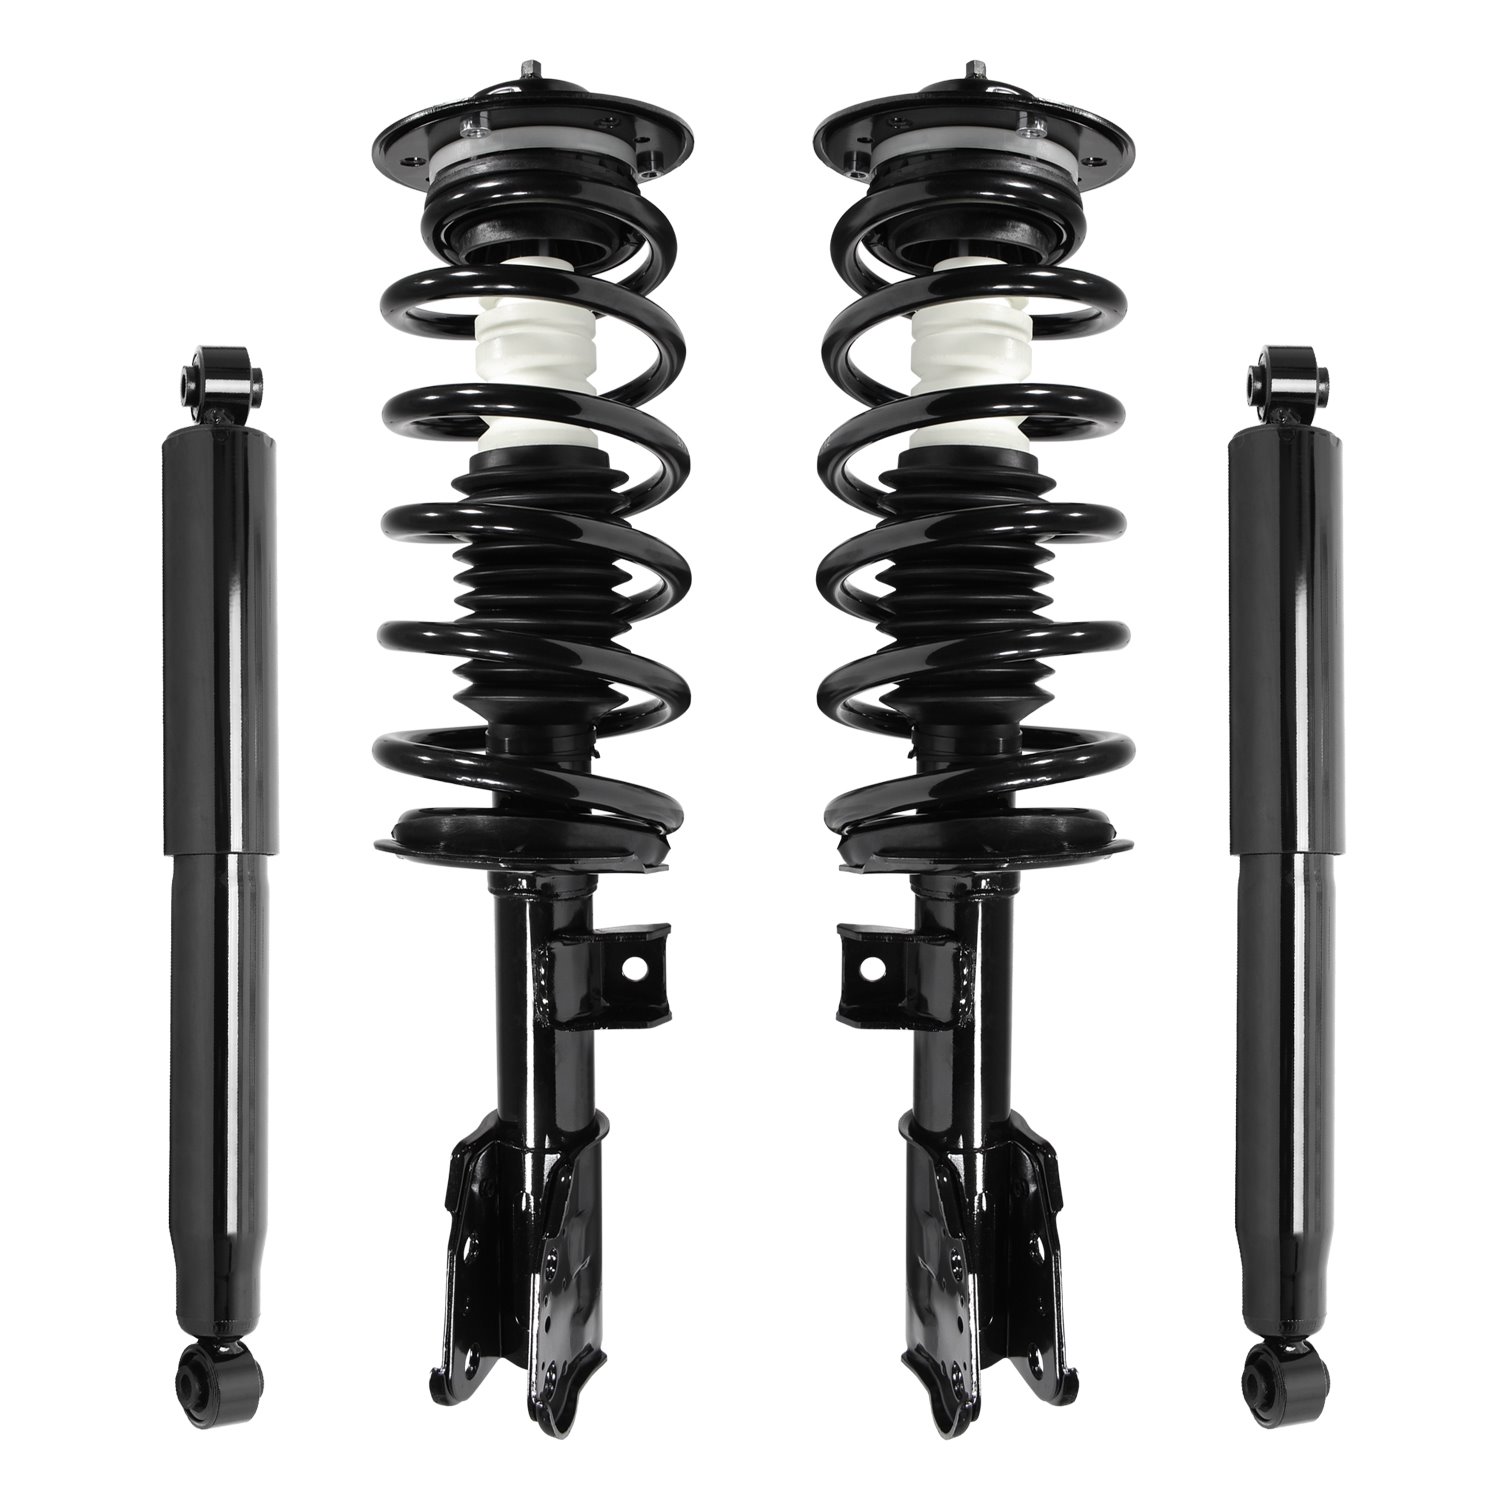 4-11011-251140-001 Front & Rear Suspension Strut & Coil Spring Assembly Fits Select GM